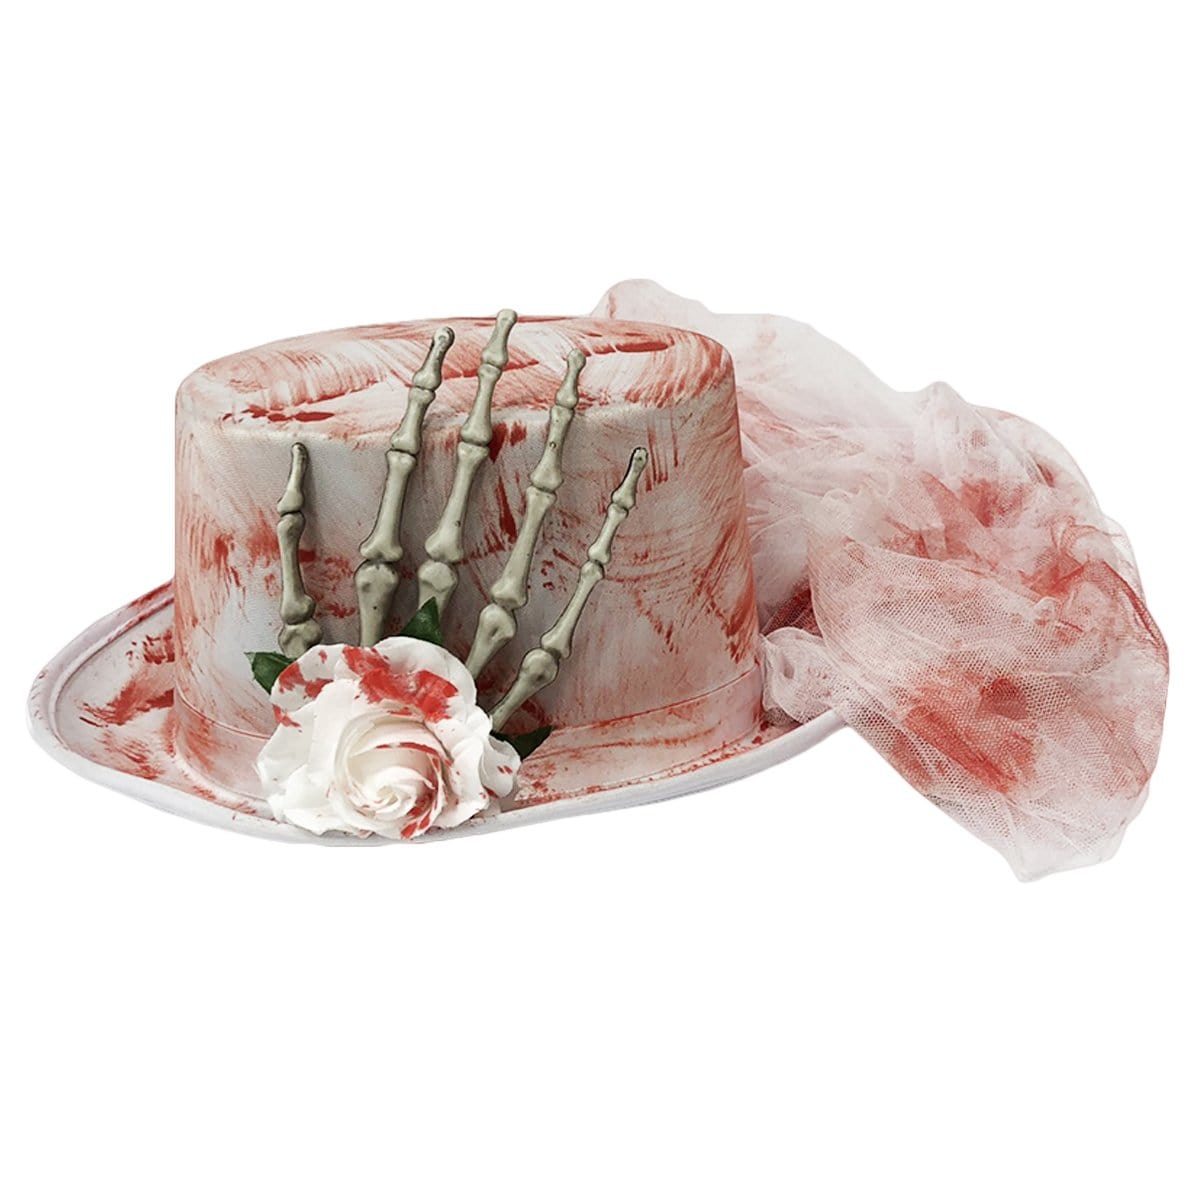 Buy Costume Accessories Bloody hat with skeleton hand for adults sold at Party Expert